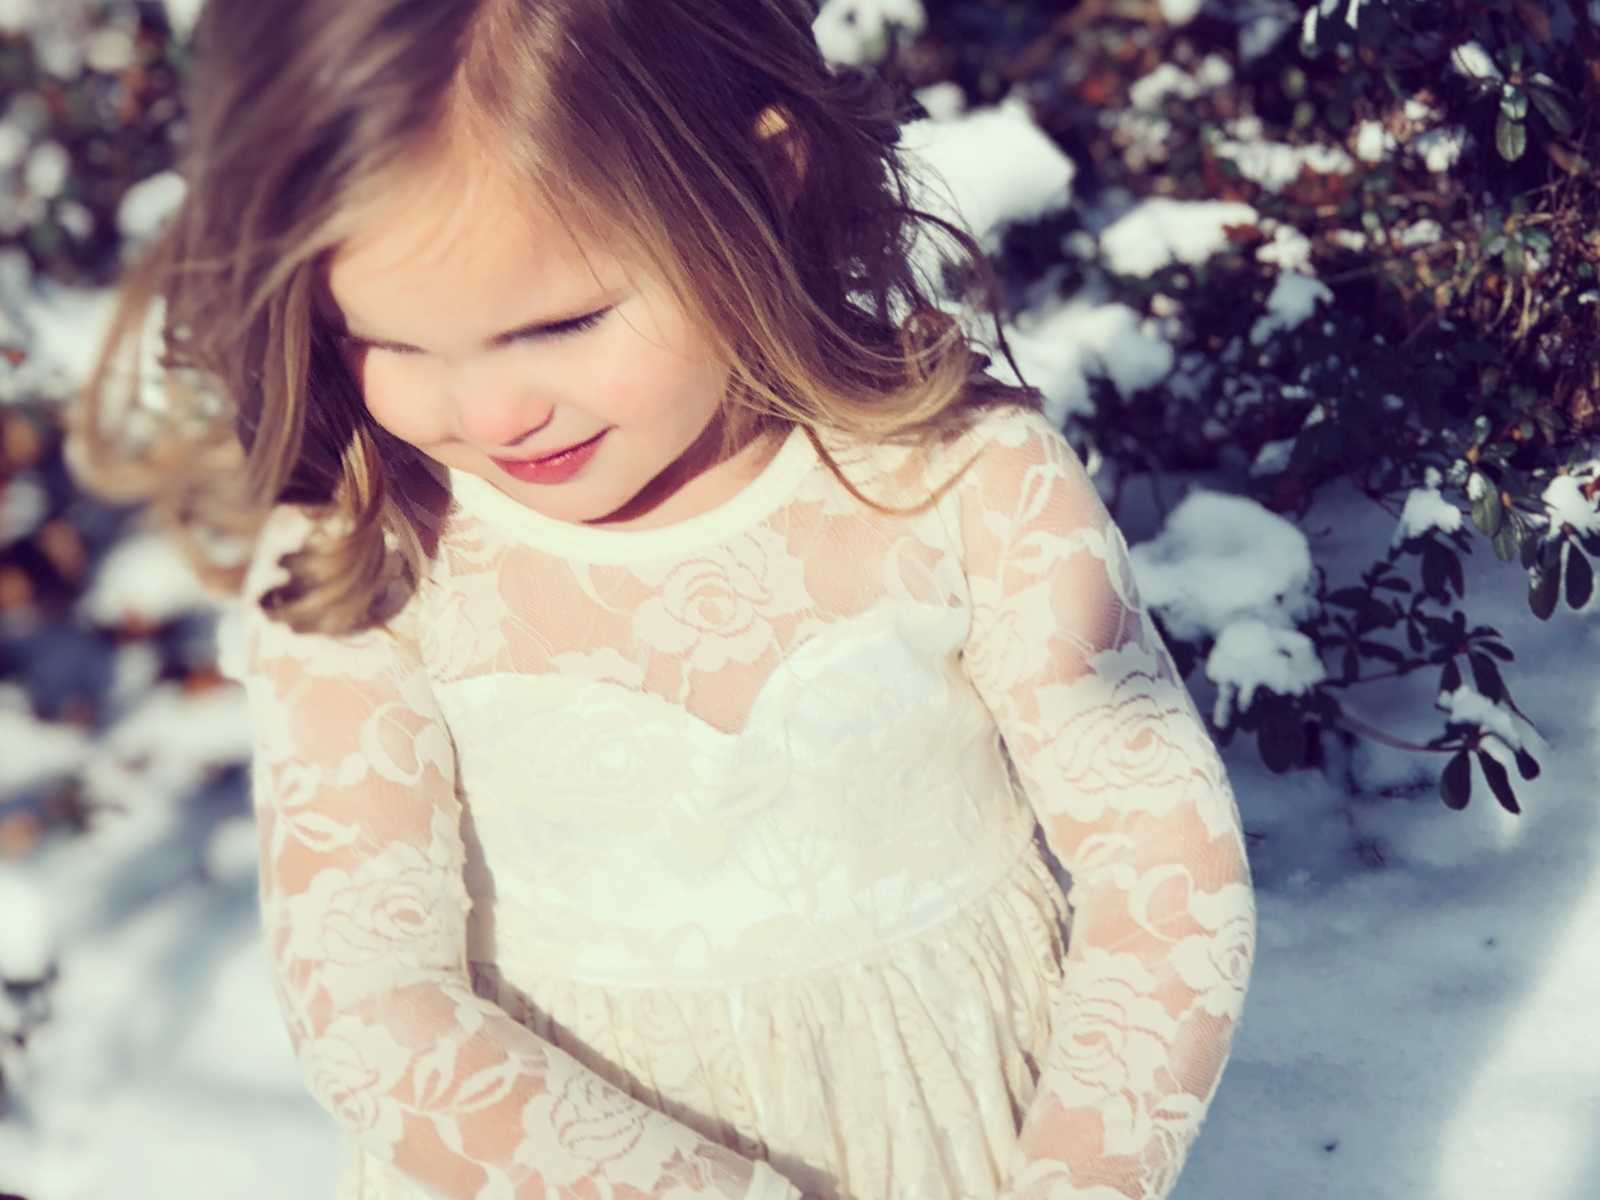 young girl in white floral lace dress looks down in front of snowy bush